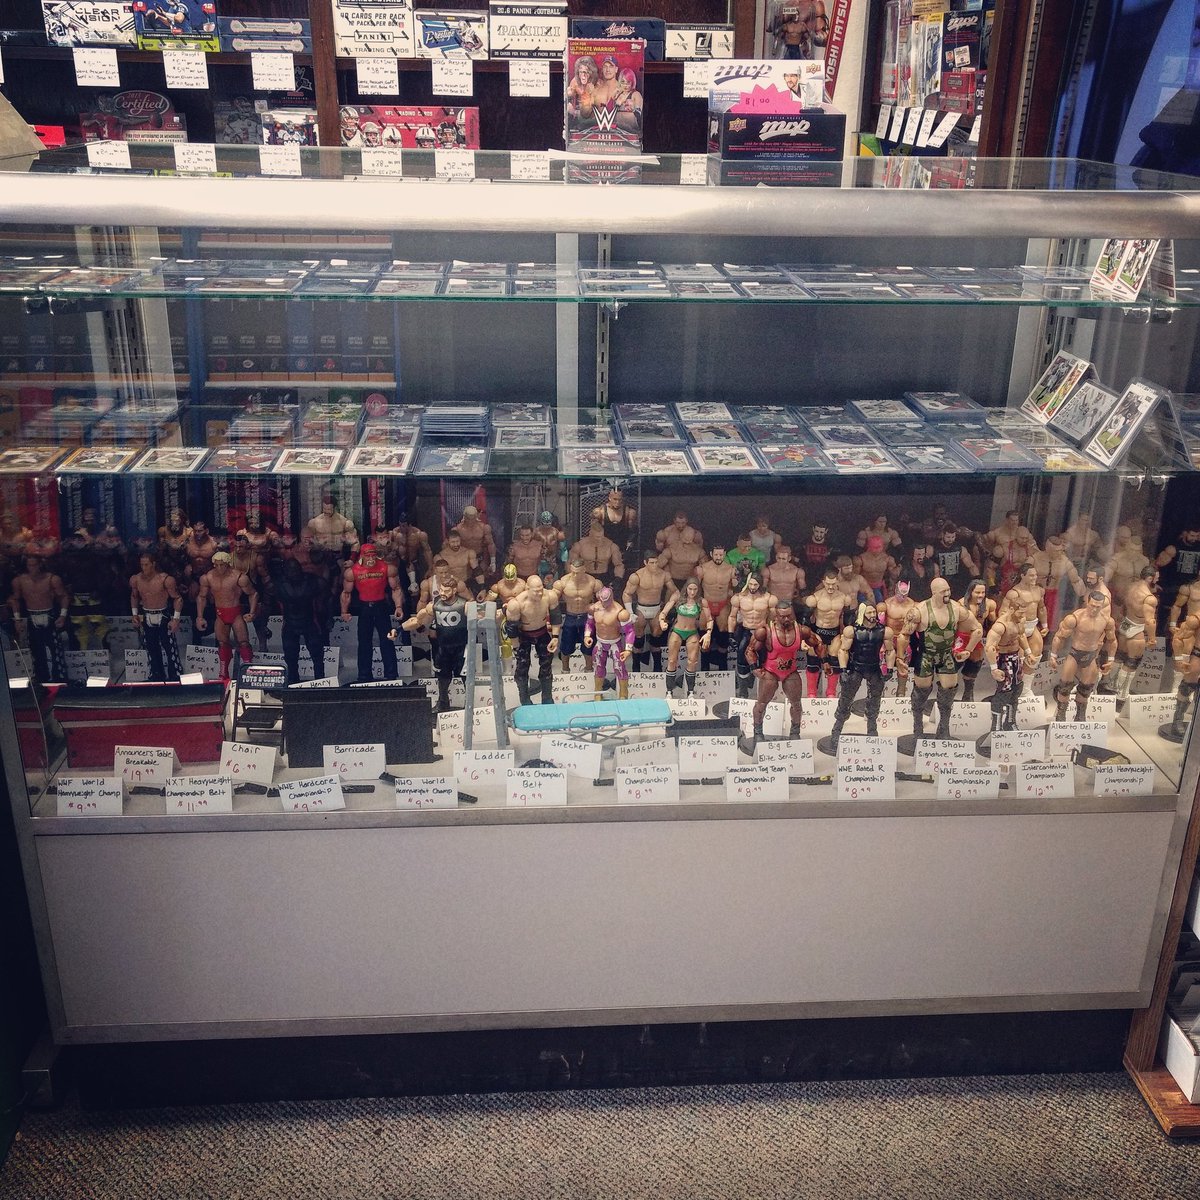 We have a huge (and constantly changing)  selection of #wwe elite figures. From #ricflair to #bodallas and everyone in between. We also stock #championshipbelts #announcertables #rings and more. Come check out the showcase and pick up a few figures at very reasonable prices!